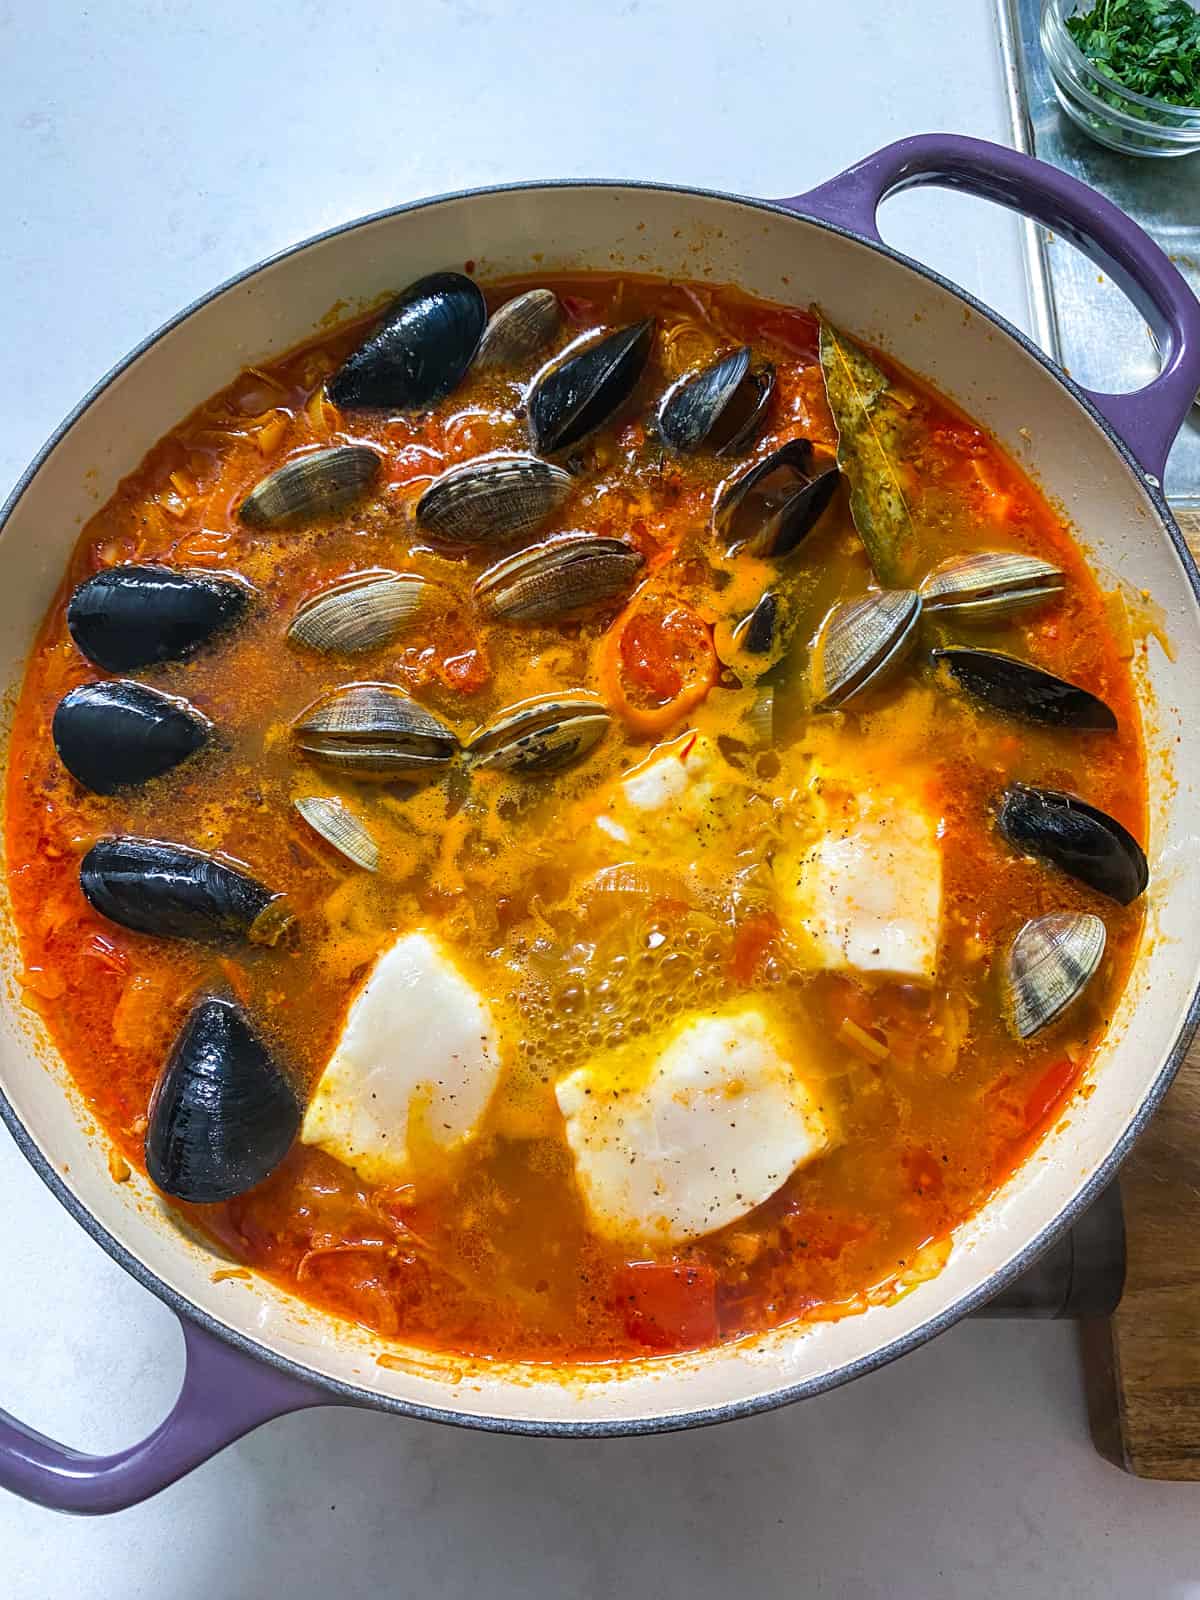 Add the cleaned mussels and clams to the simmering seafood stew and cook for 2-3 minutes before adding the other seafood.